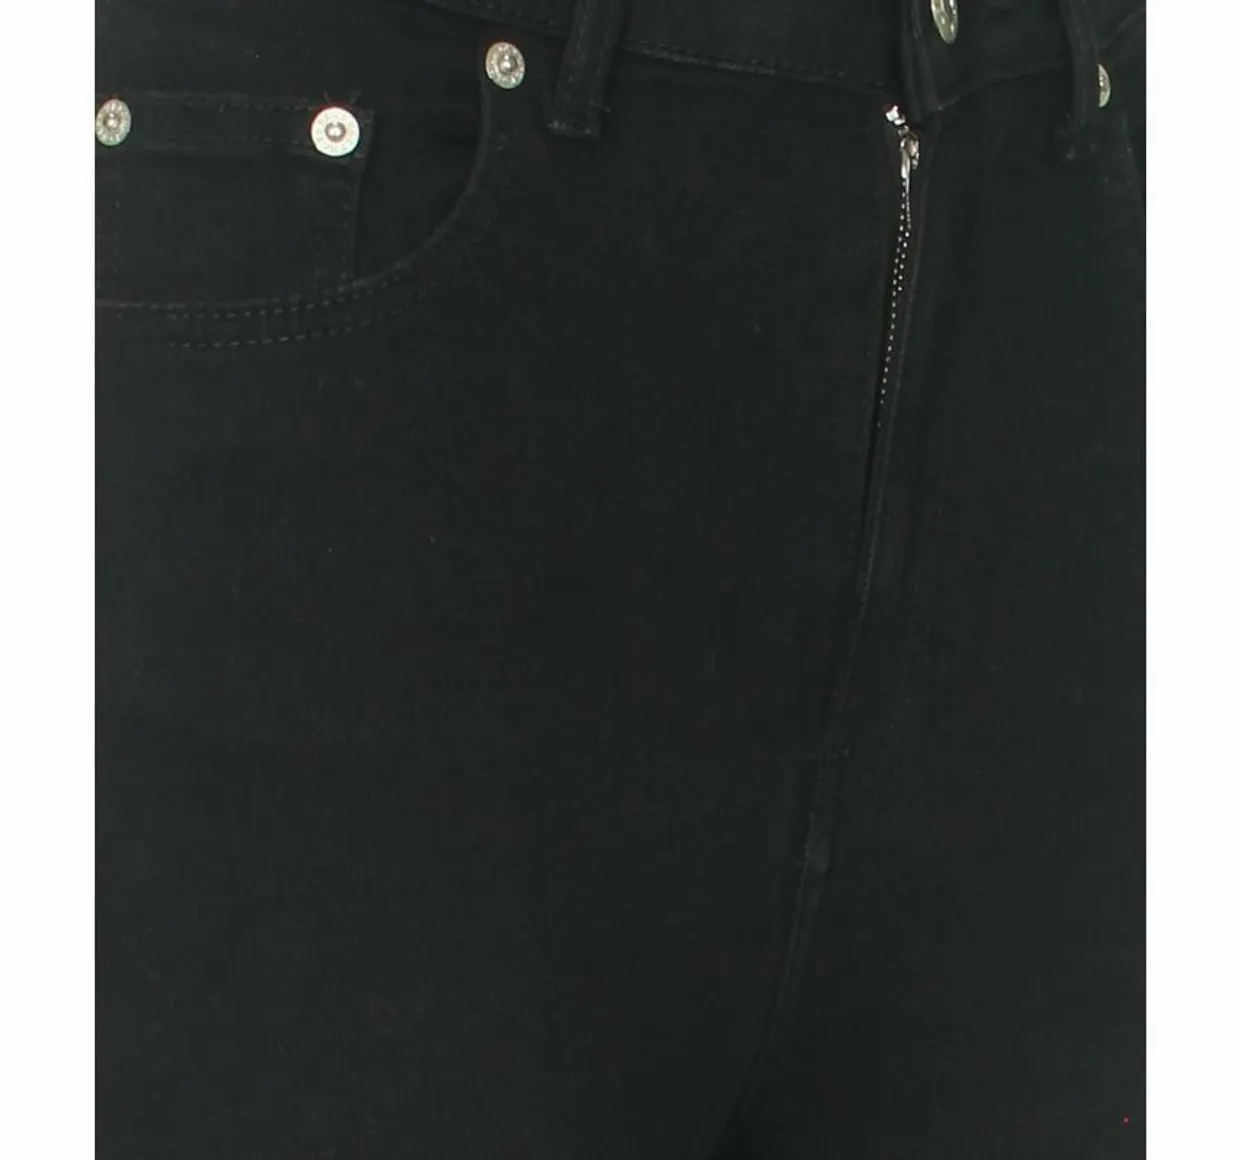 Bootcut flared jeans black